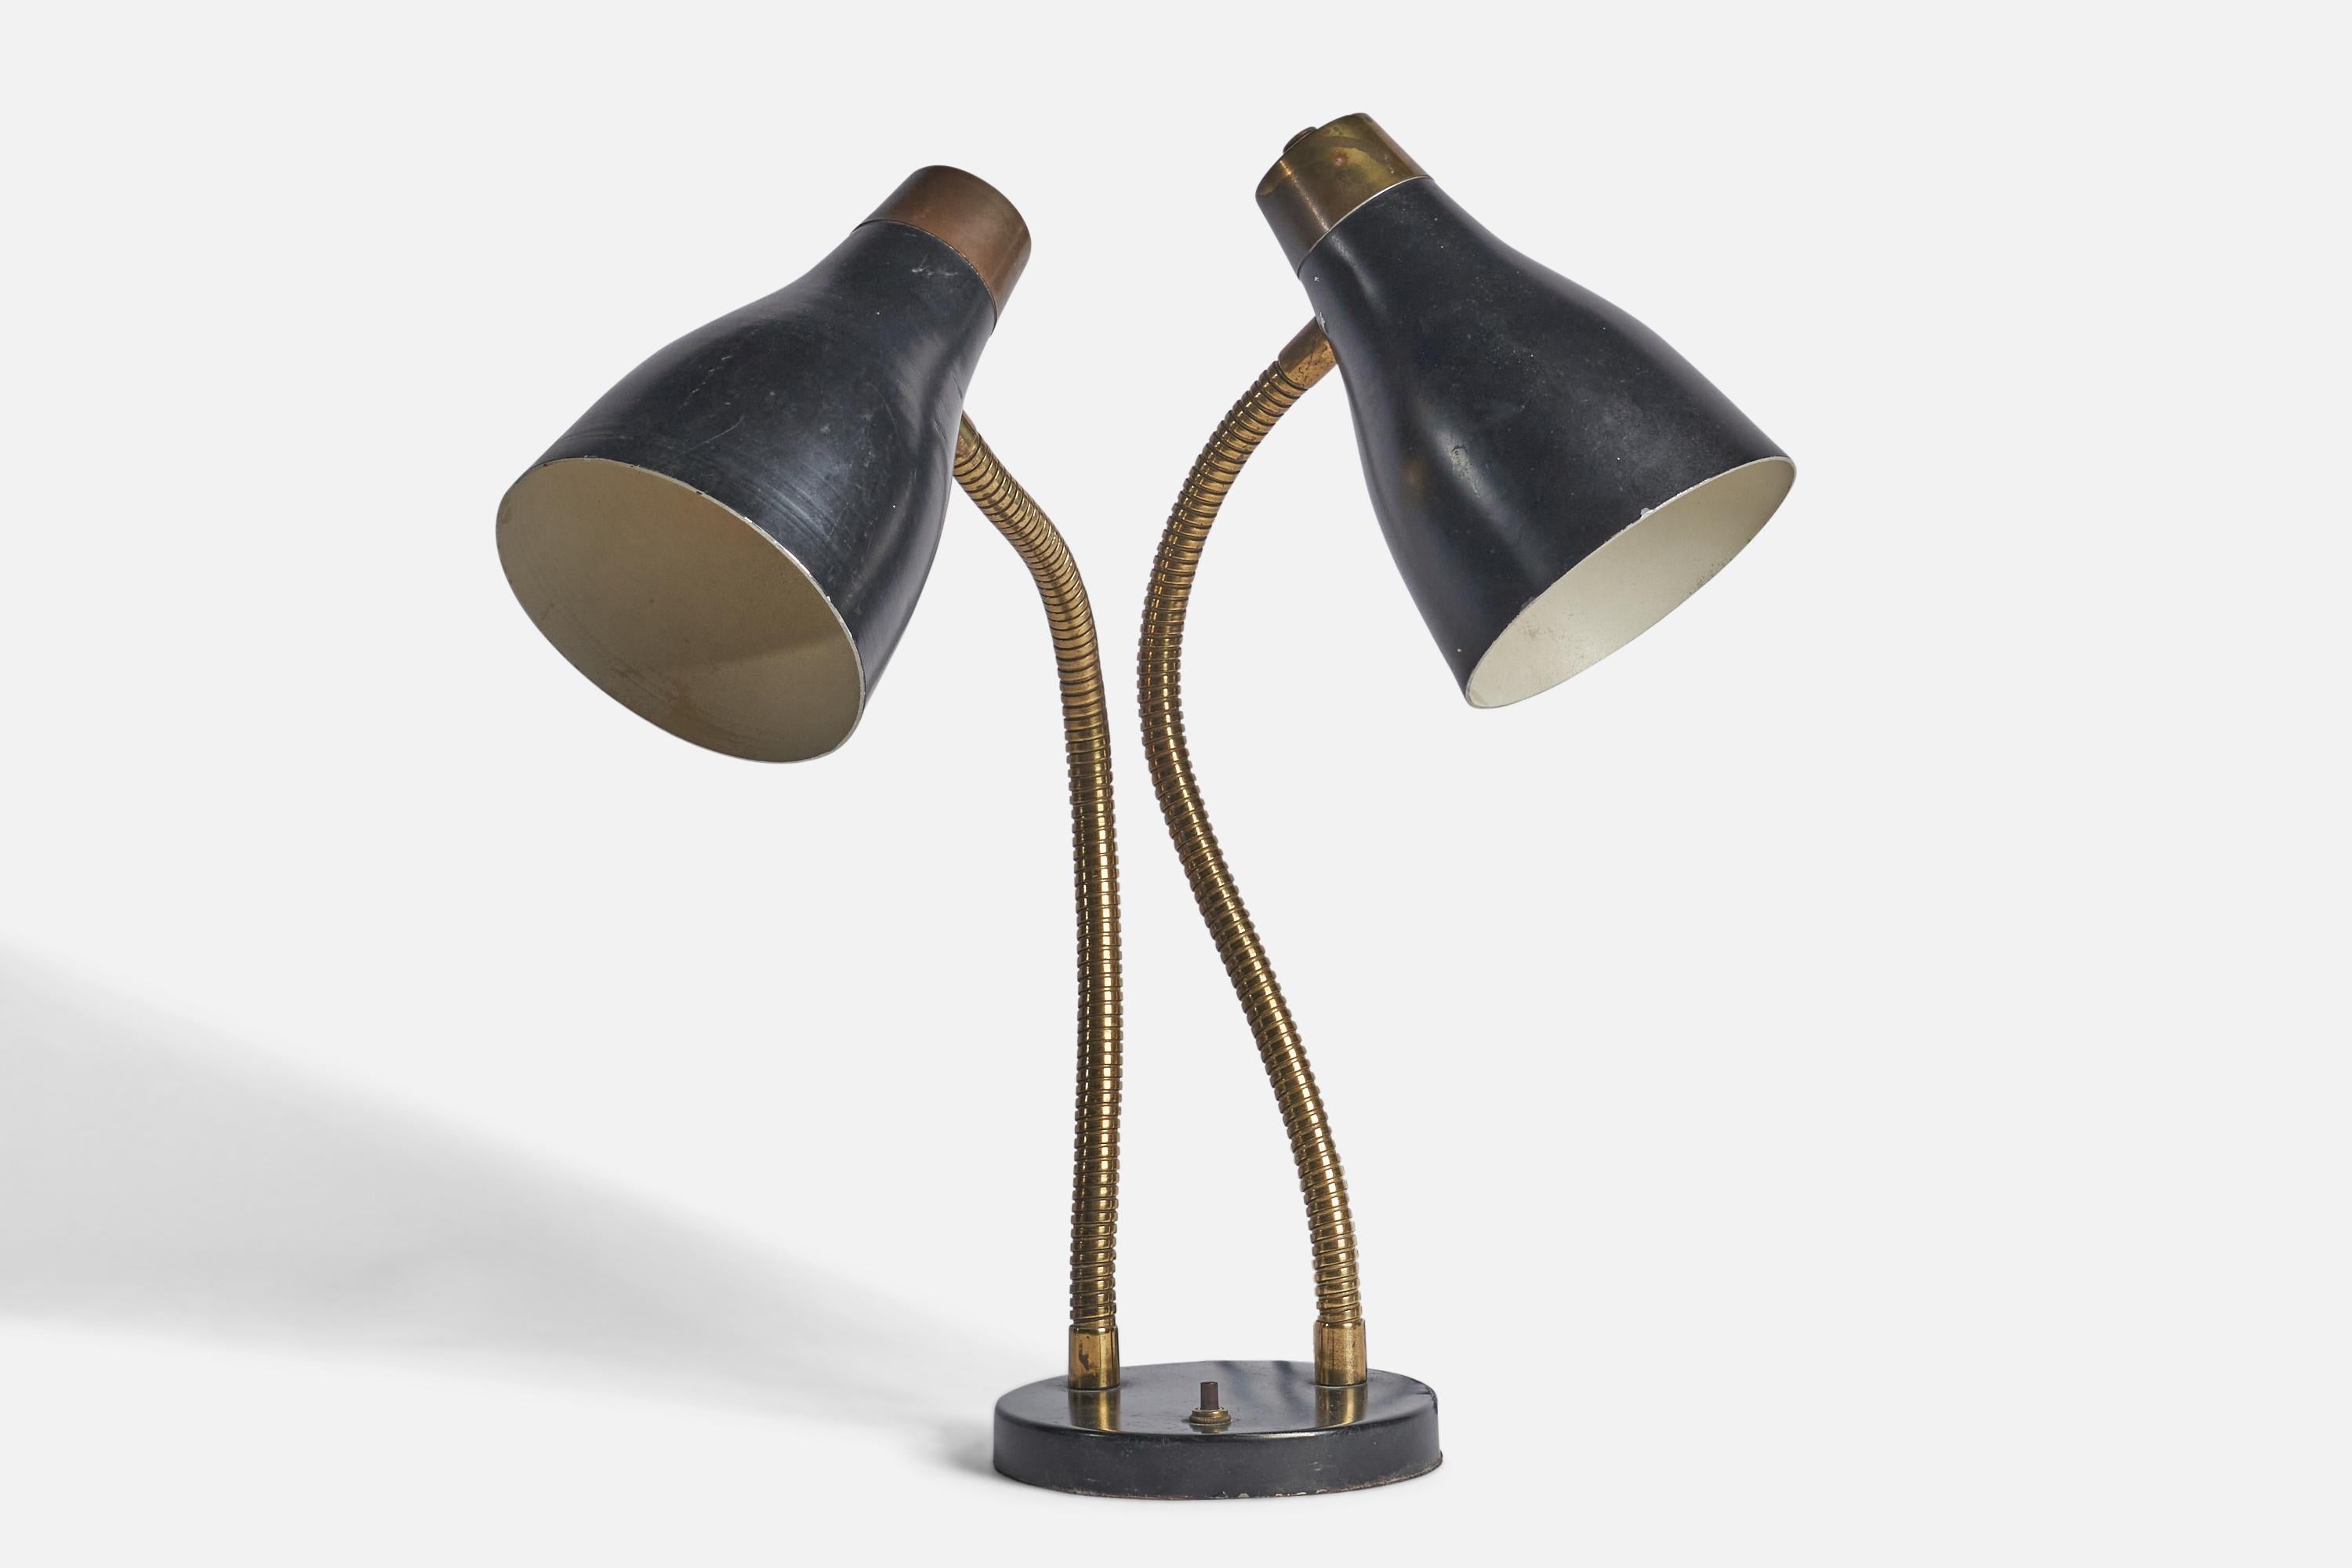 A brass and black-lacquered metal table lamp designed and produced in Sweden, c. 1940s.
Overall Dimensions (inches): 17” H x 17.5” W x 9” D
Bulb Specifications: E-26 Bulb
Number of Sockets: 2
All lighting will be converted for US usage. We are